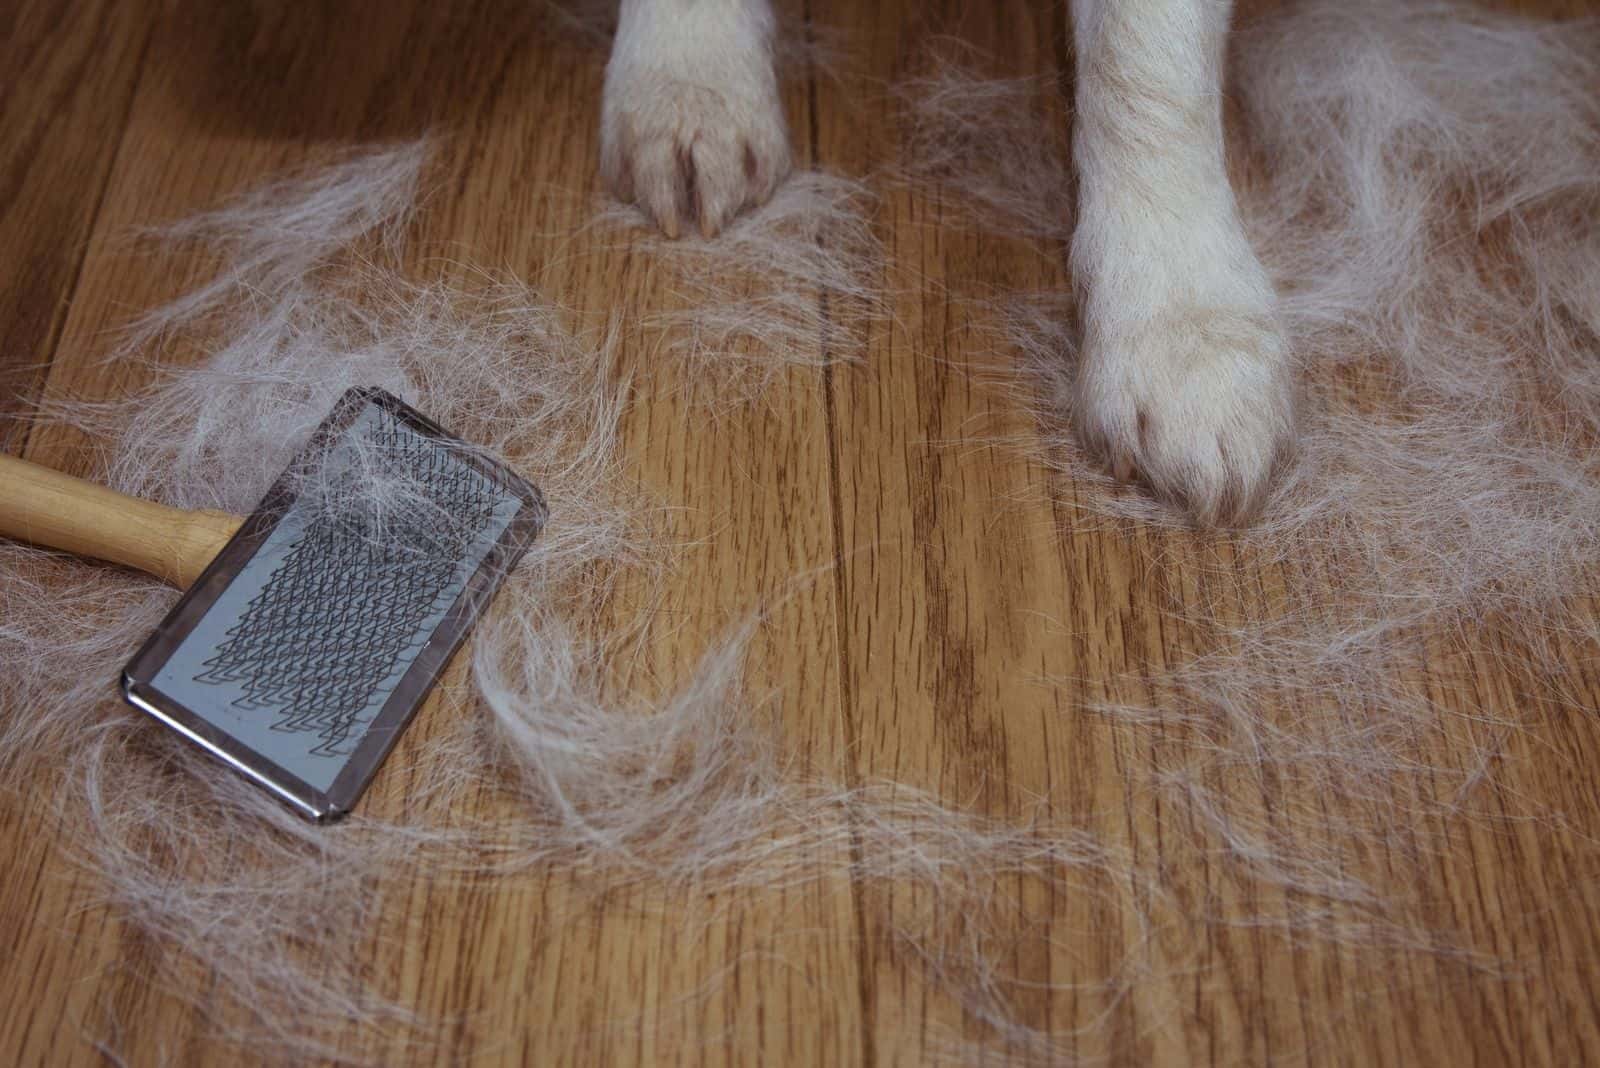 shedding dog's hair with a brush and feet of the dog on the floor